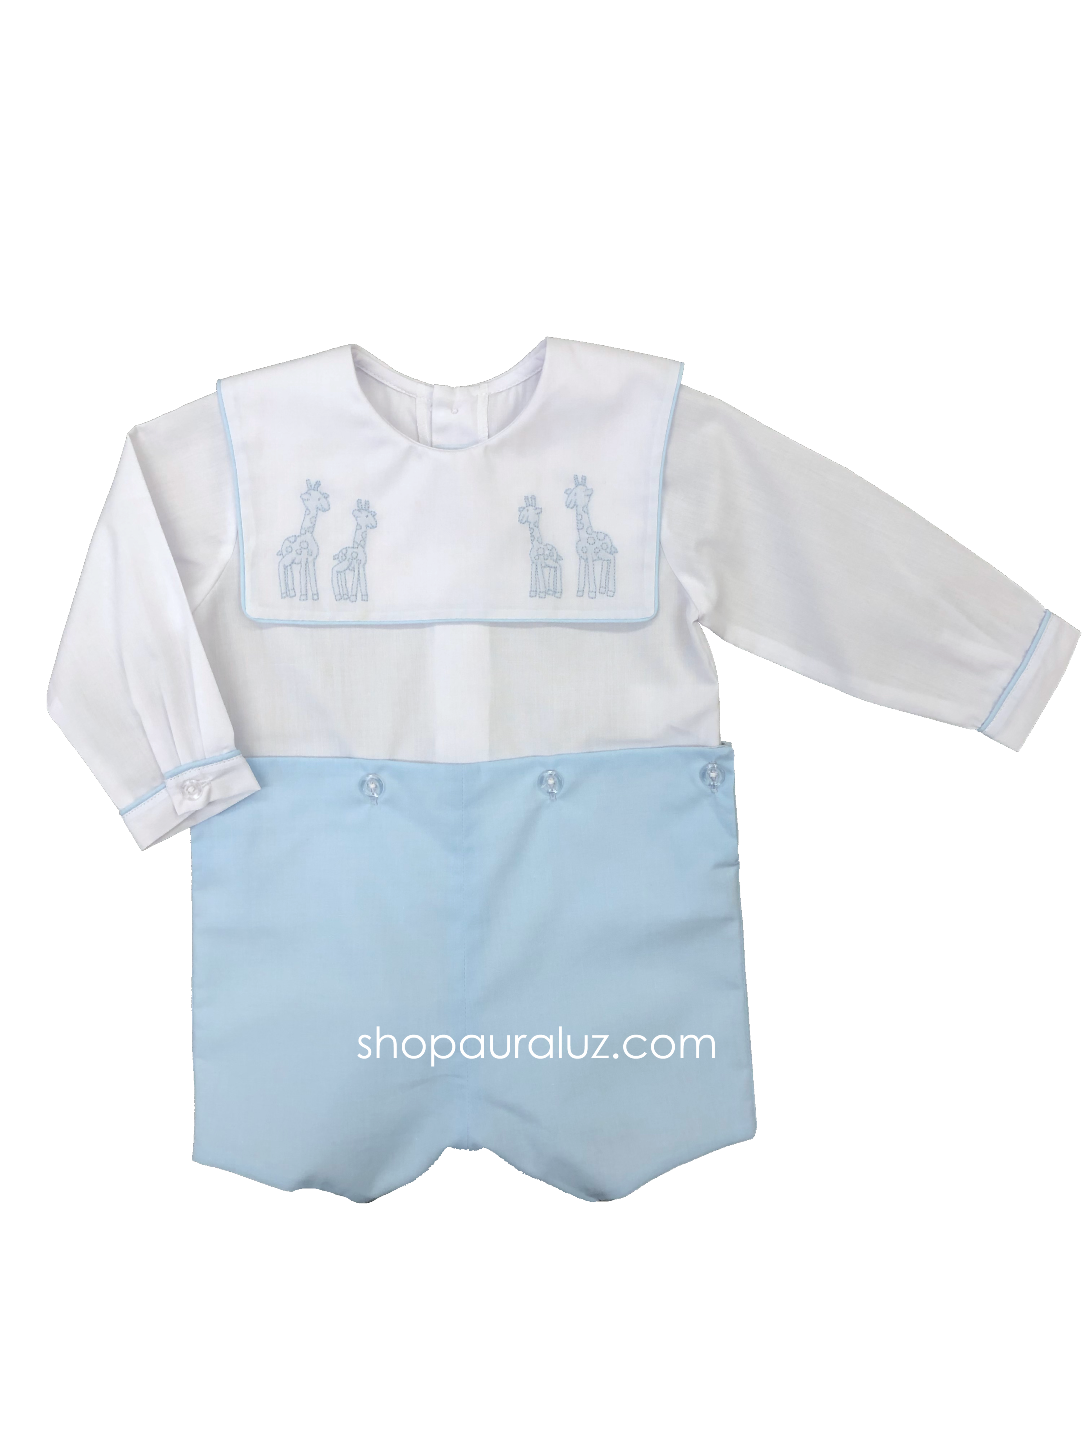 Auraluz Boy Button-On..long sleeve...Blue with embroidered giraffes